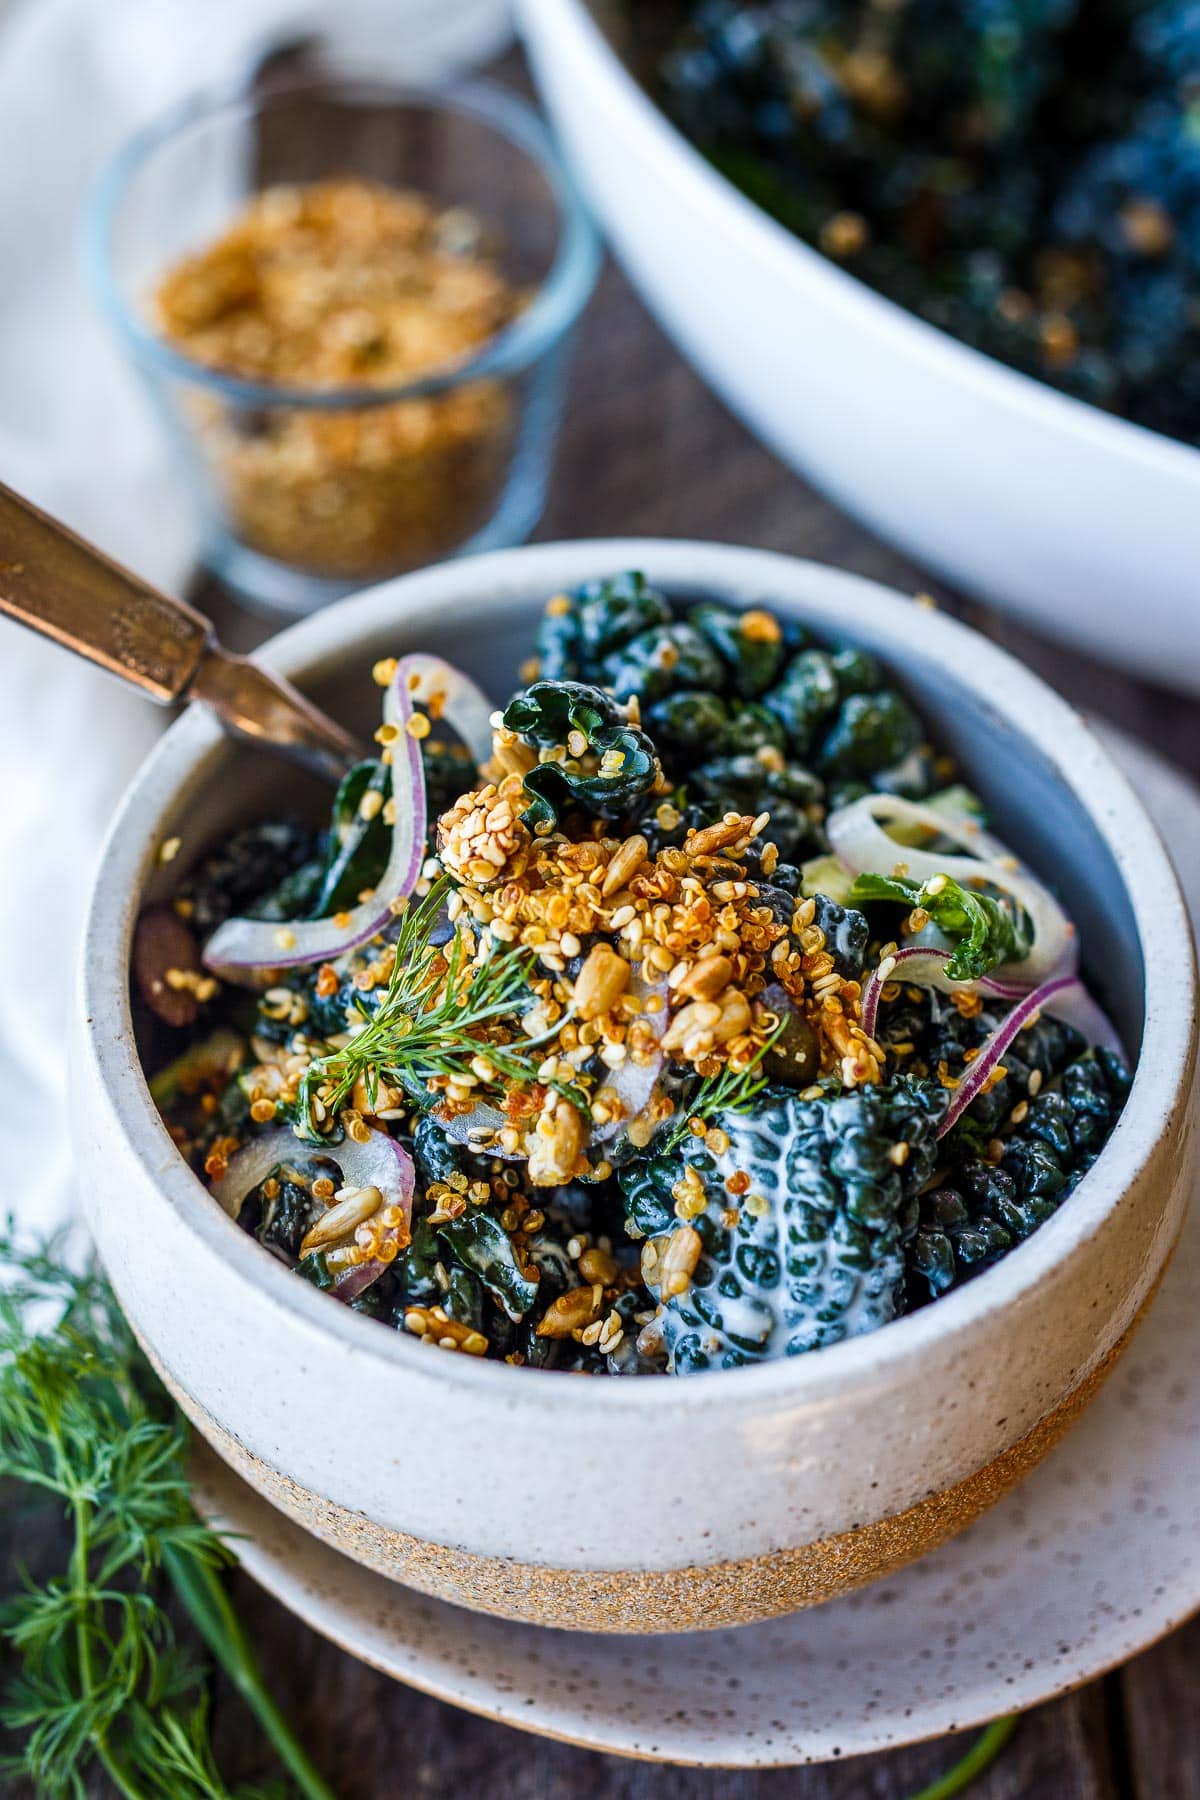 Full of healthy texture and flavor, this nutrient-dense Kale Salad is enhanced with creamy buttermilk dressing, tamed red onions and topped with an addicting crunchy quinoa salad topper.